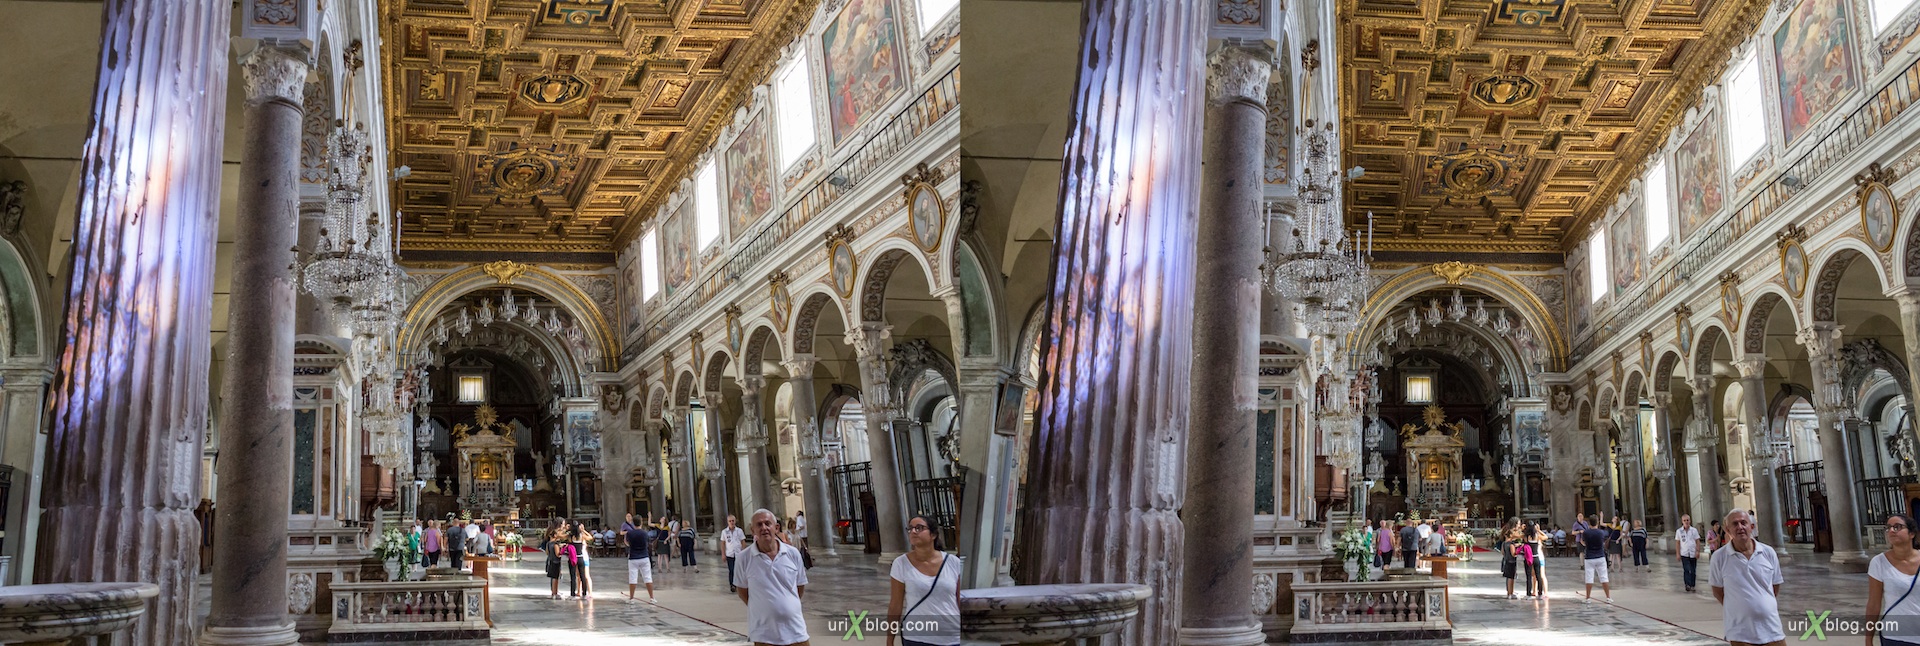 2012, church of Santa Maria in Aracoeli, Rome, Italy, cathedral, monastery, Christianity, Catholicism, 3D, stereo pair, cross-eyed, crossview, cross view stereo pair